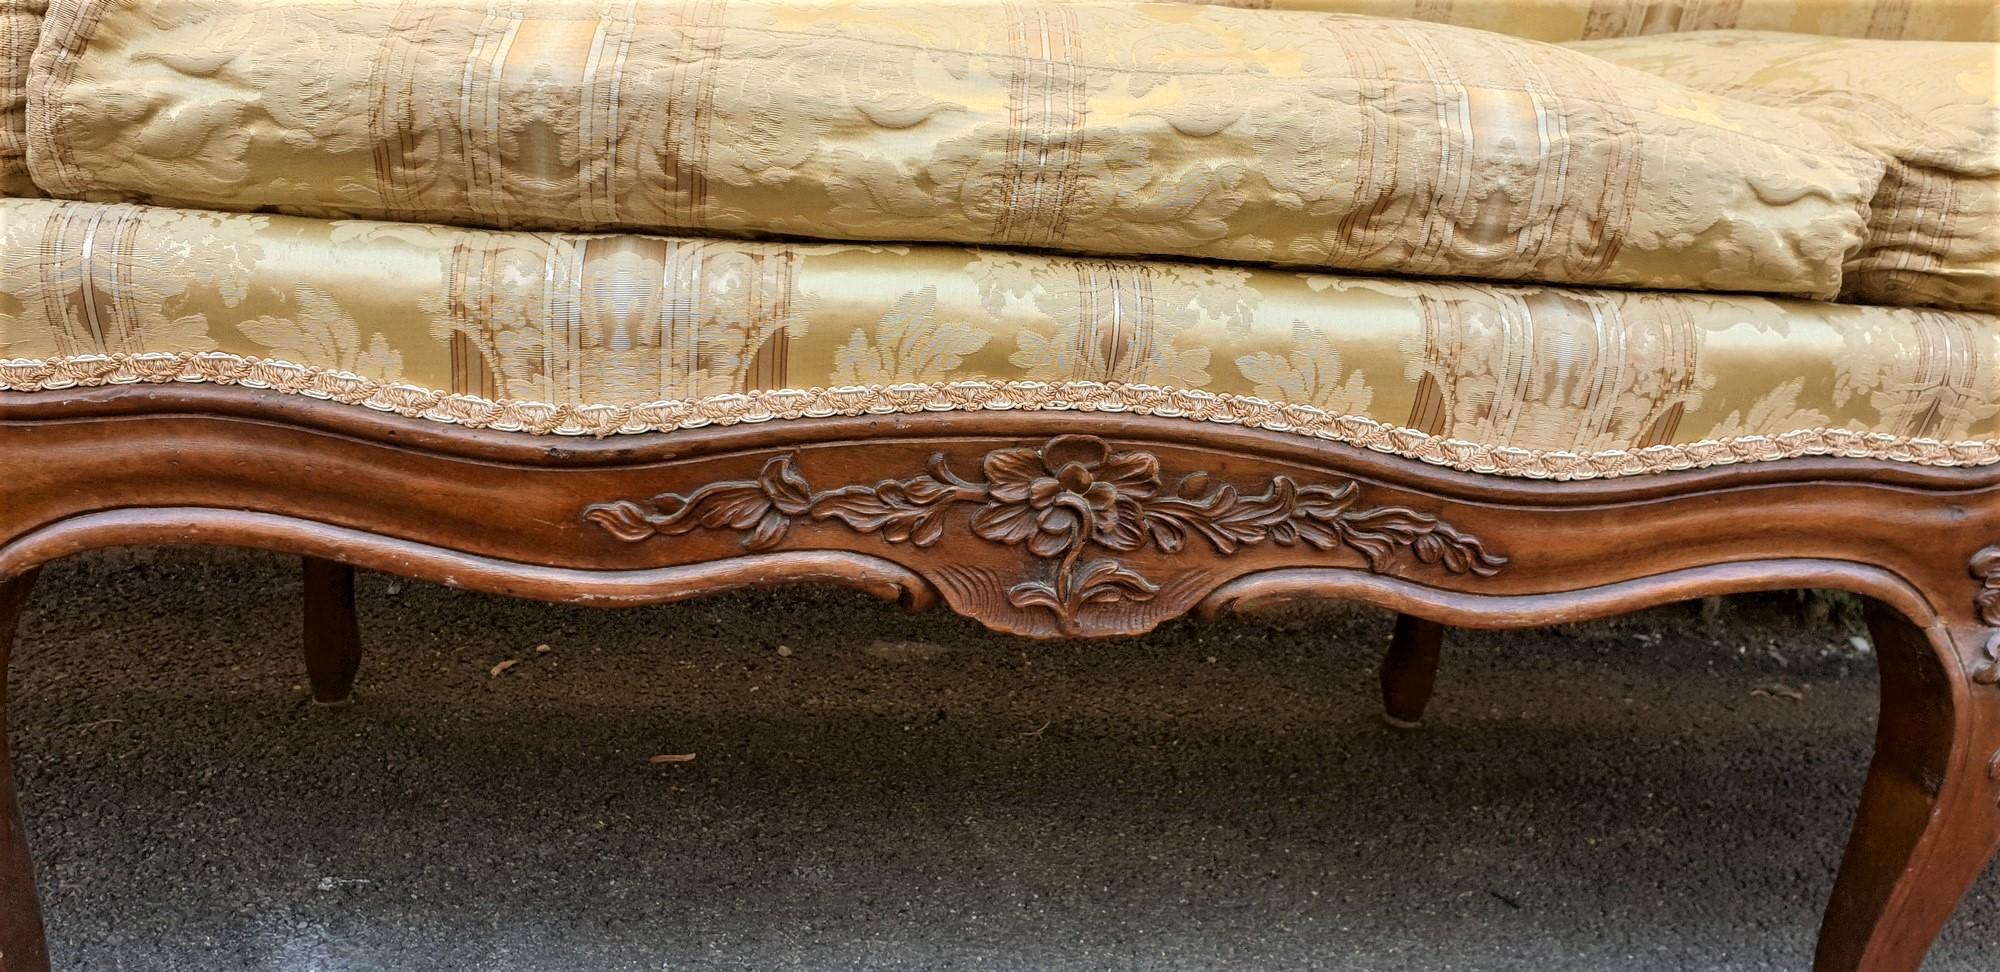 French Large Walnut Sofa, Louis XV Period, 18th Century For Sale